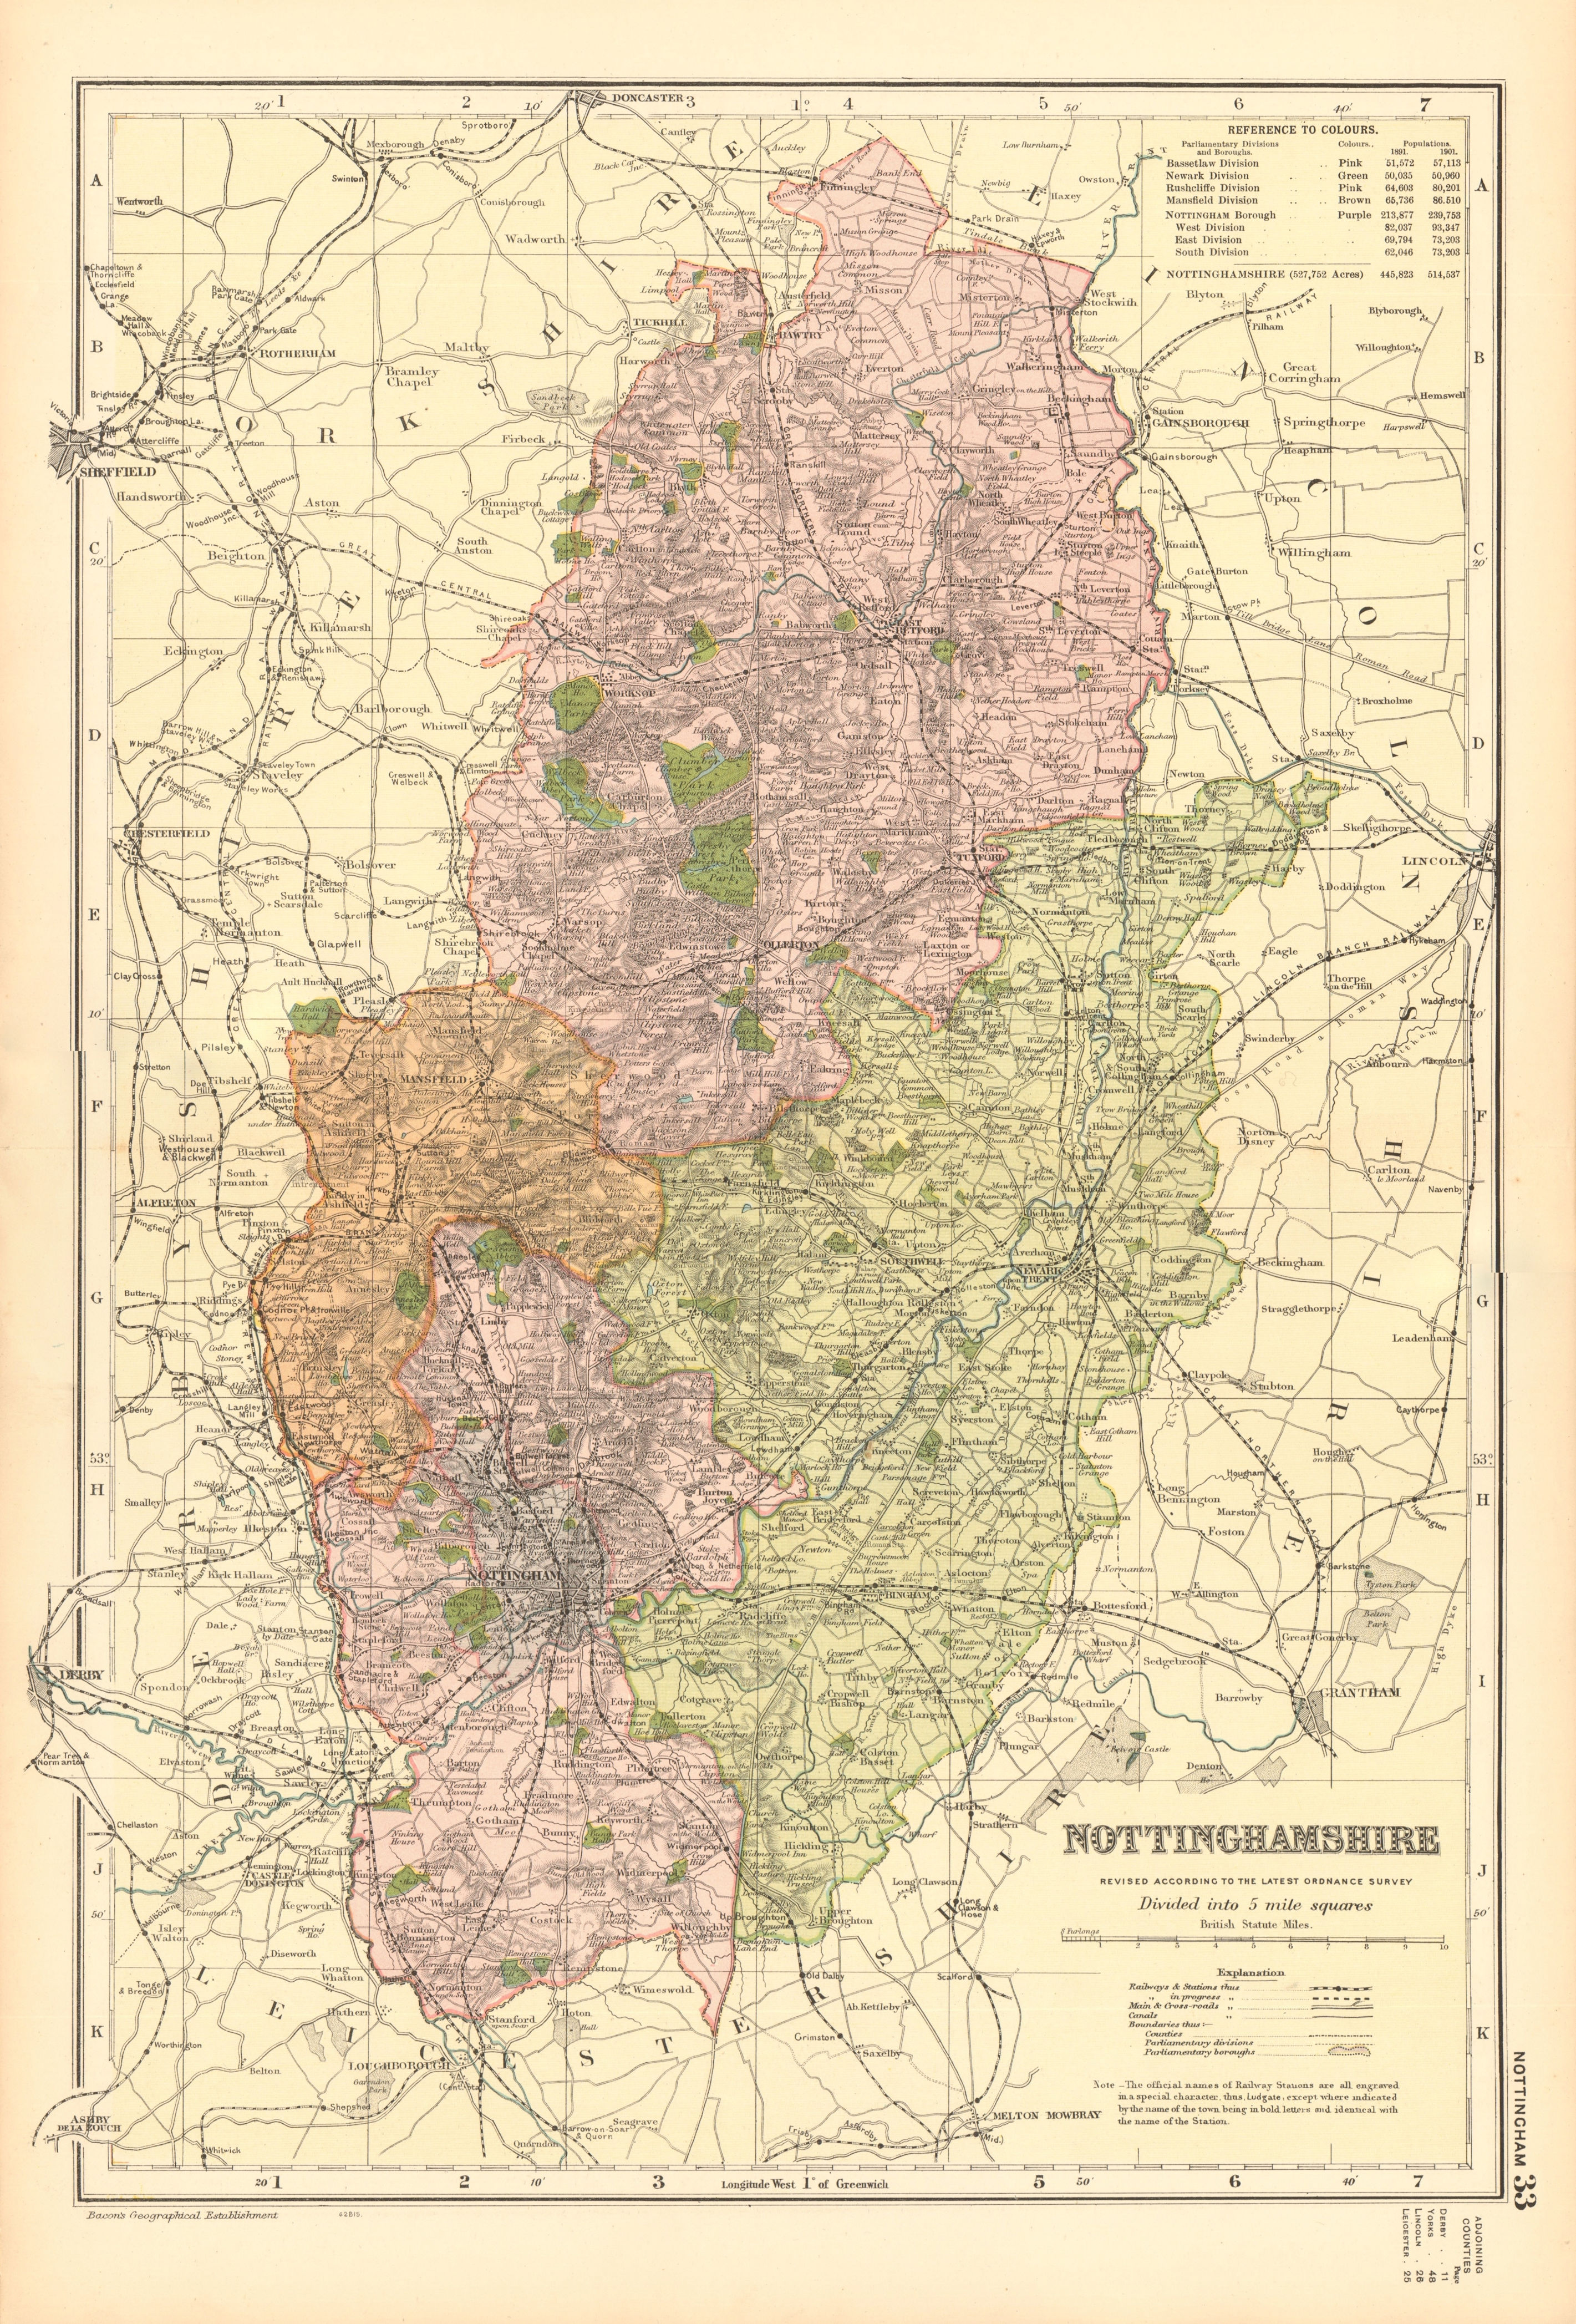 Associate Product NOTTINGHAMSHIRE. Showing Parliamentary divisions,boroughs & parks.BACON 1904 map